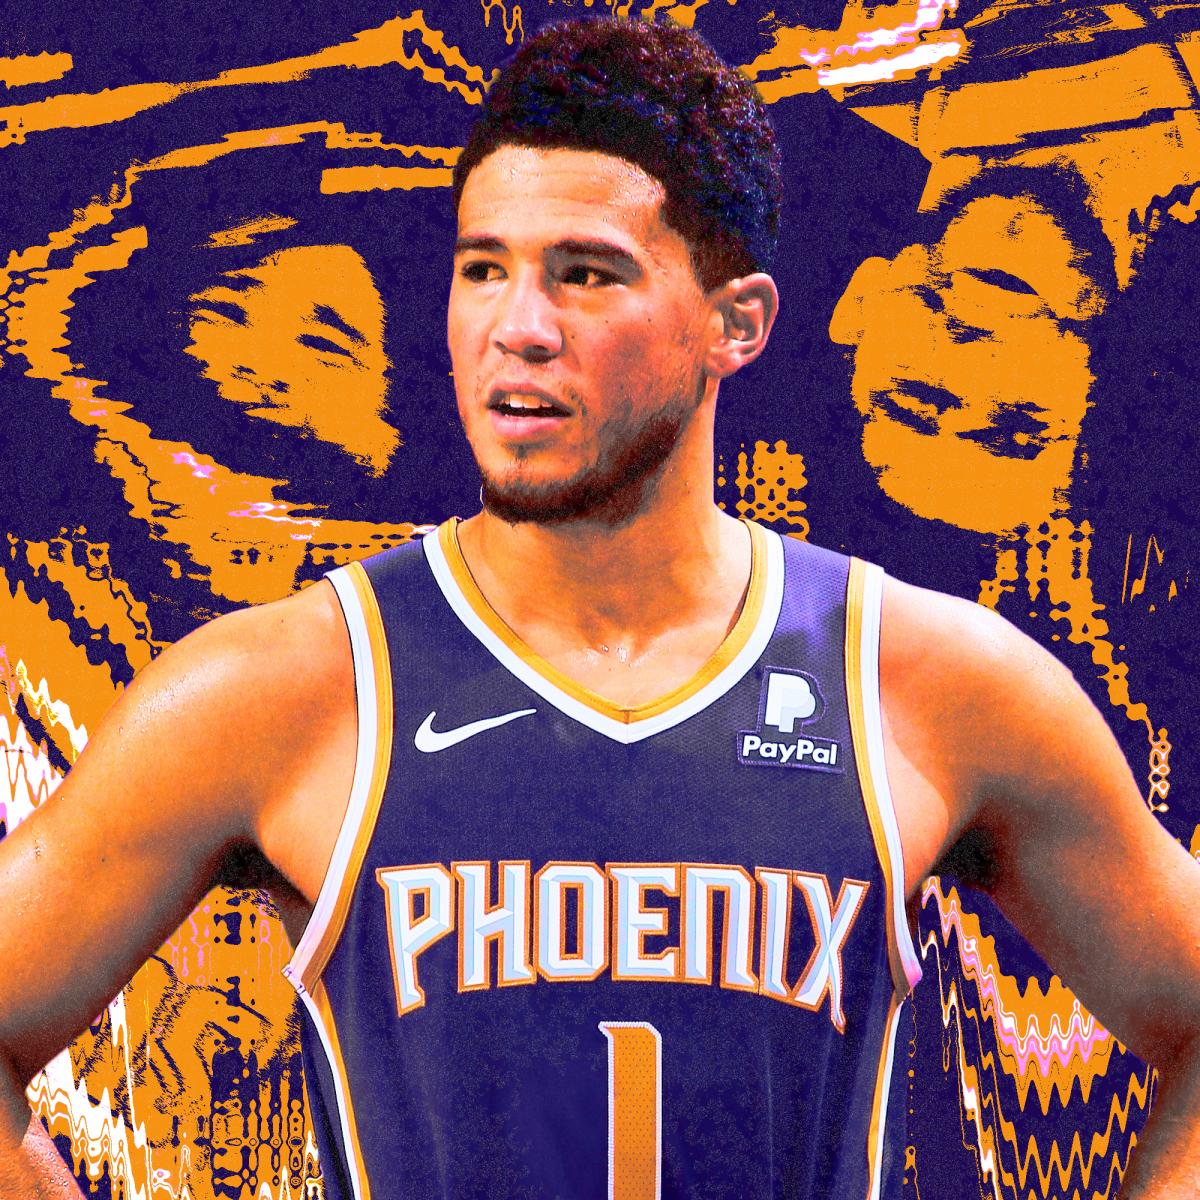 Phoenix Suns on X: The new threads have arrived! Get your Book